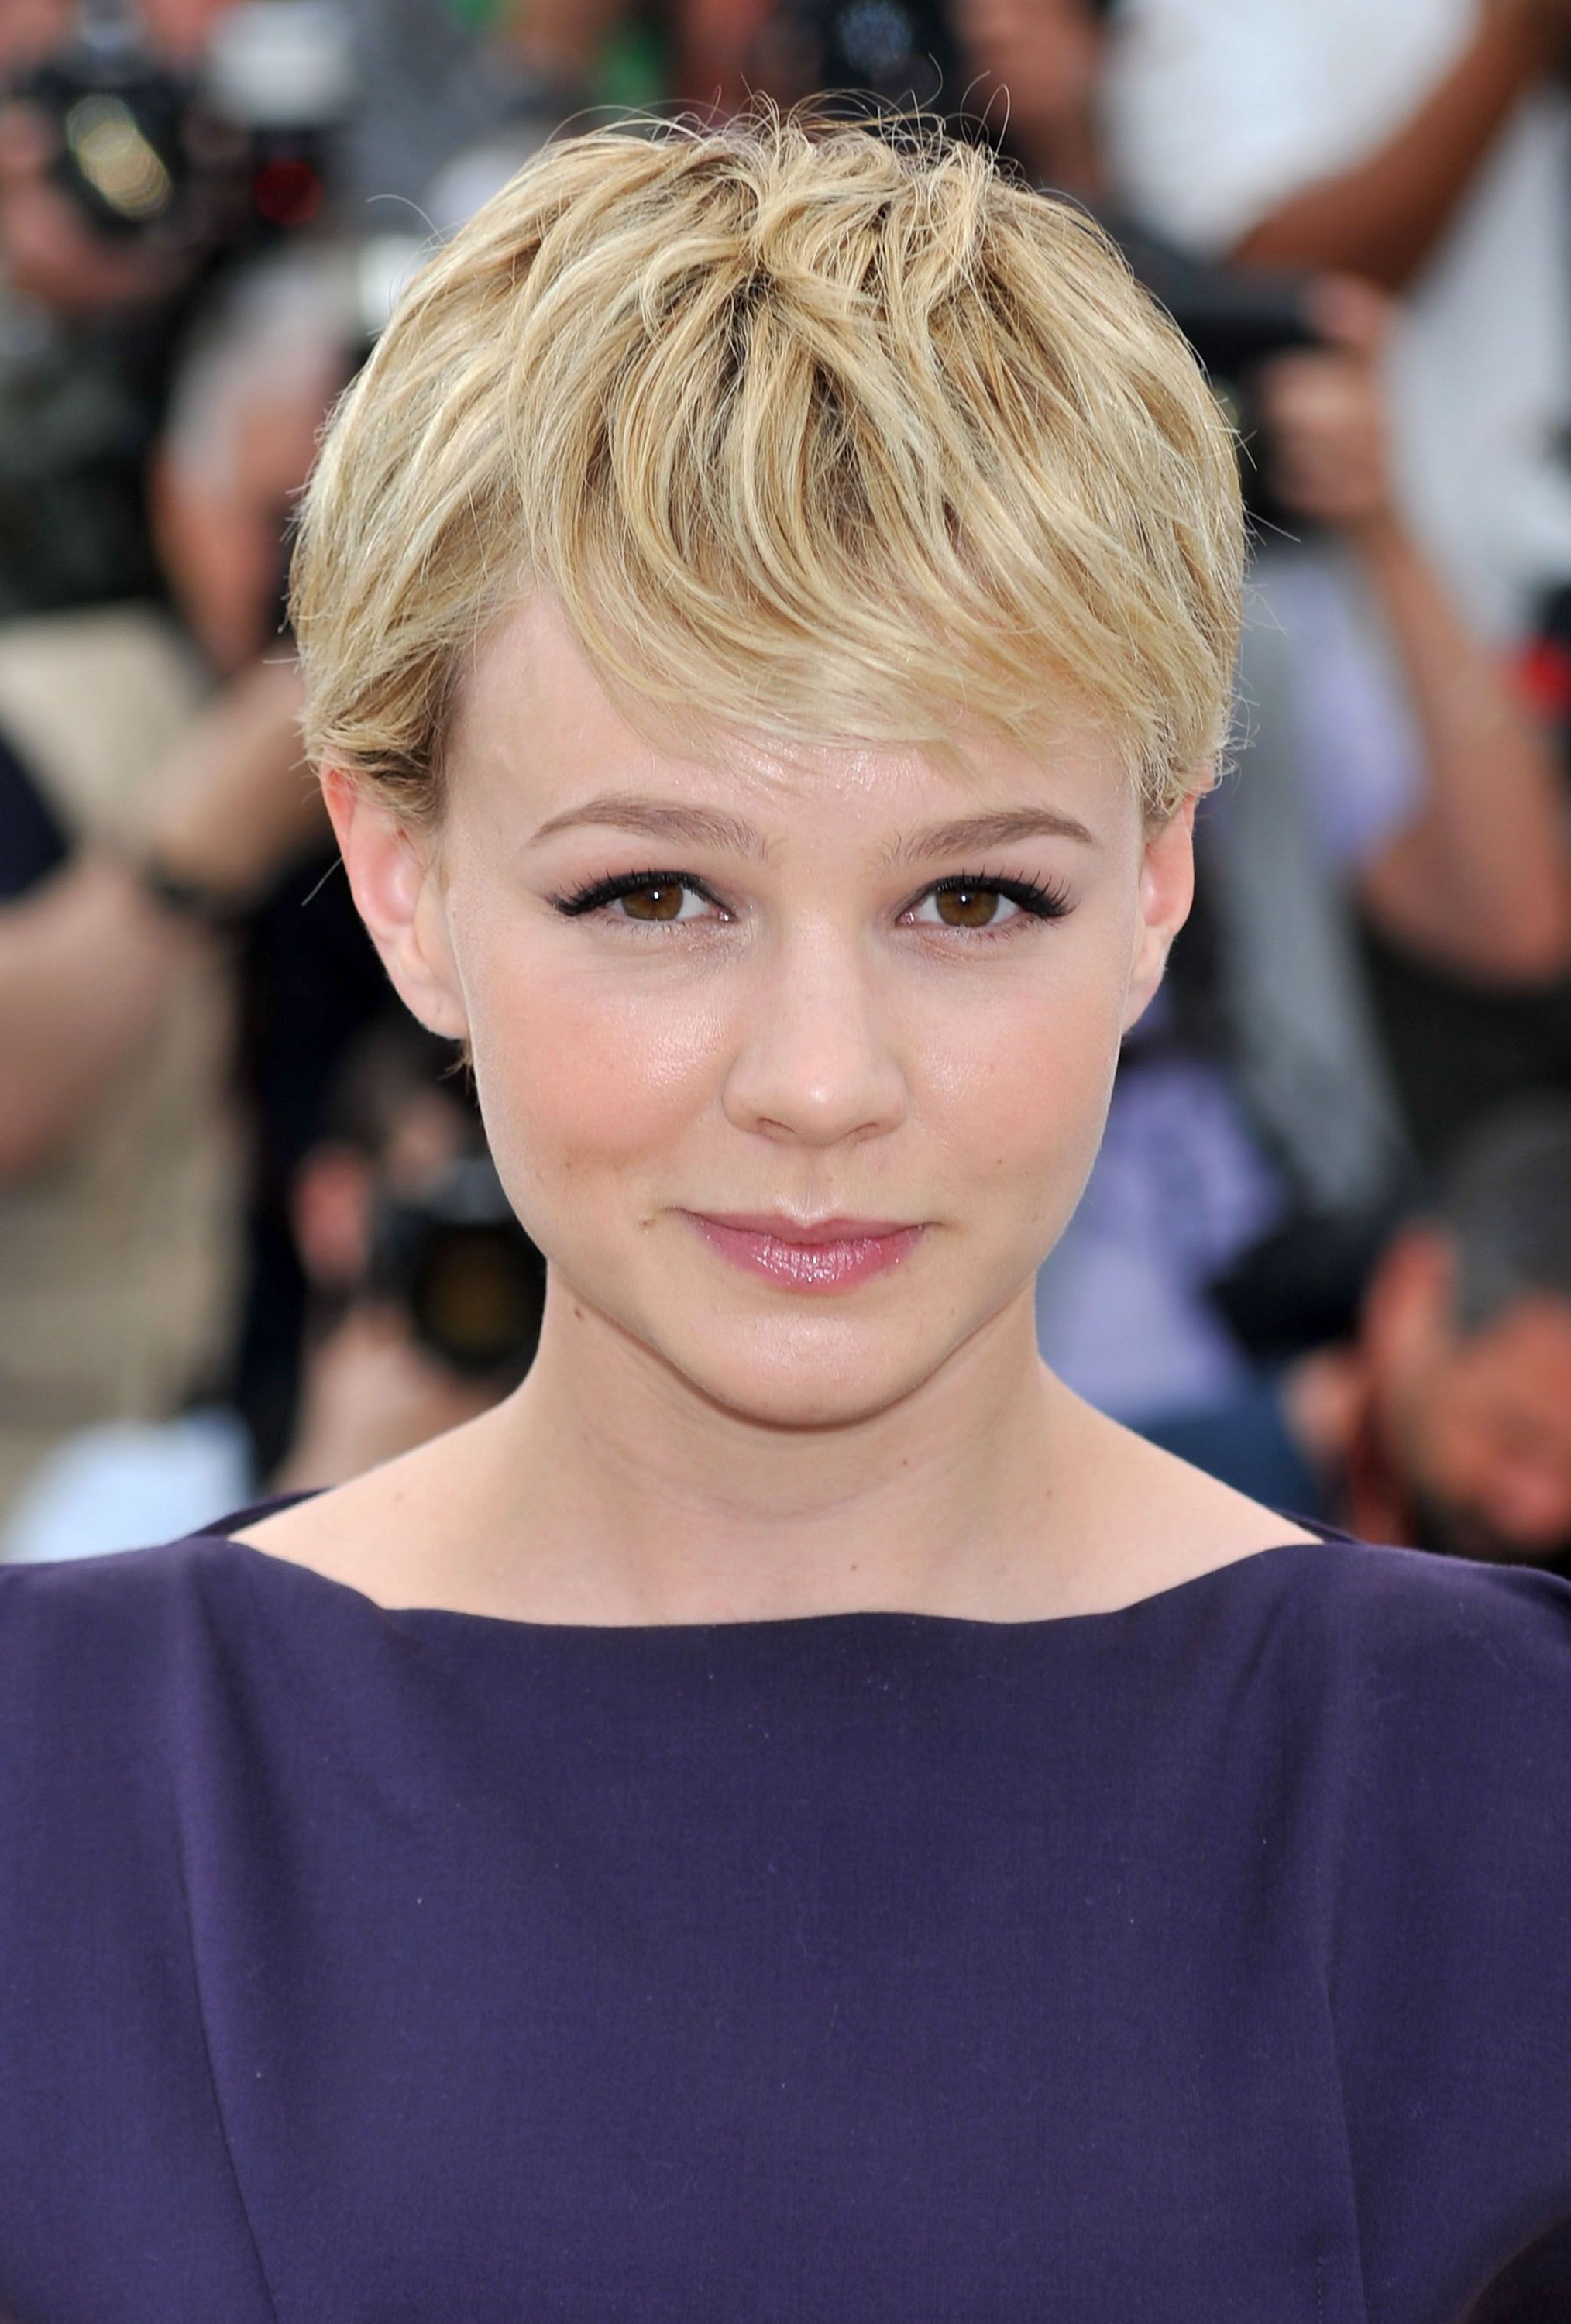 65 Best Short Hairstyles, Haircuts, And Short Hair Ideas For 2018 For Short Haircuts For Celebrities (View 14 of 25)